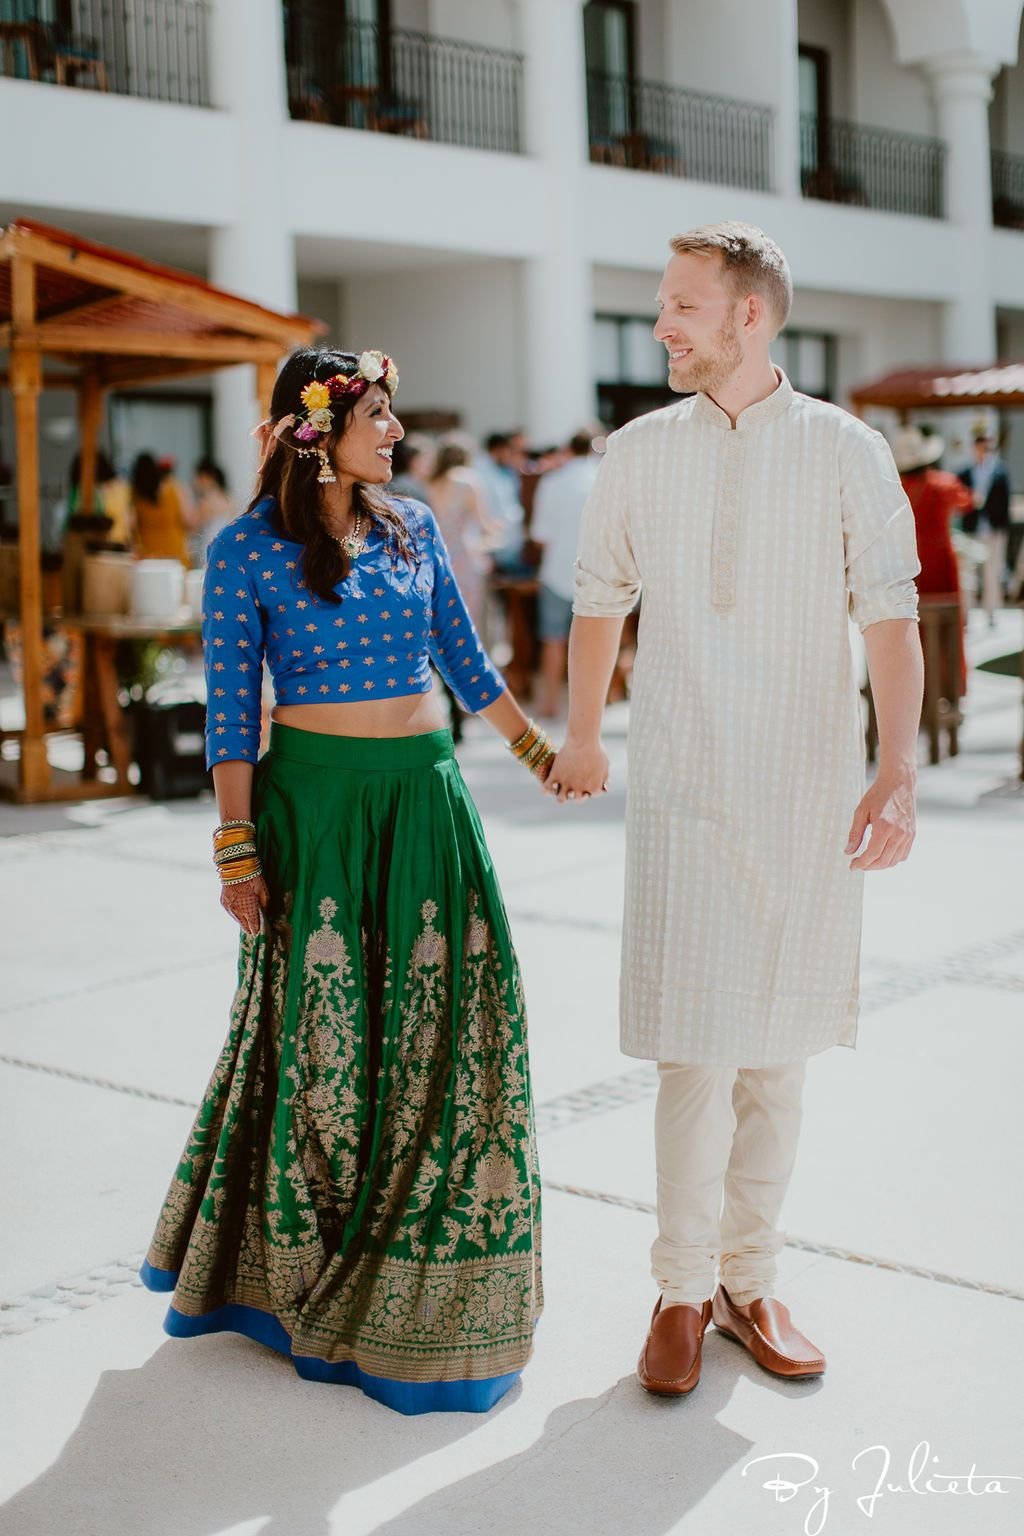 Bride and Groom posing for the amazing Julieta Amezcua, who was their photographer for their wedding weekend. They had their Haldi and Sangeet at the Hilton Los Cabos, and then their beautiful wedding at Flora Farms.